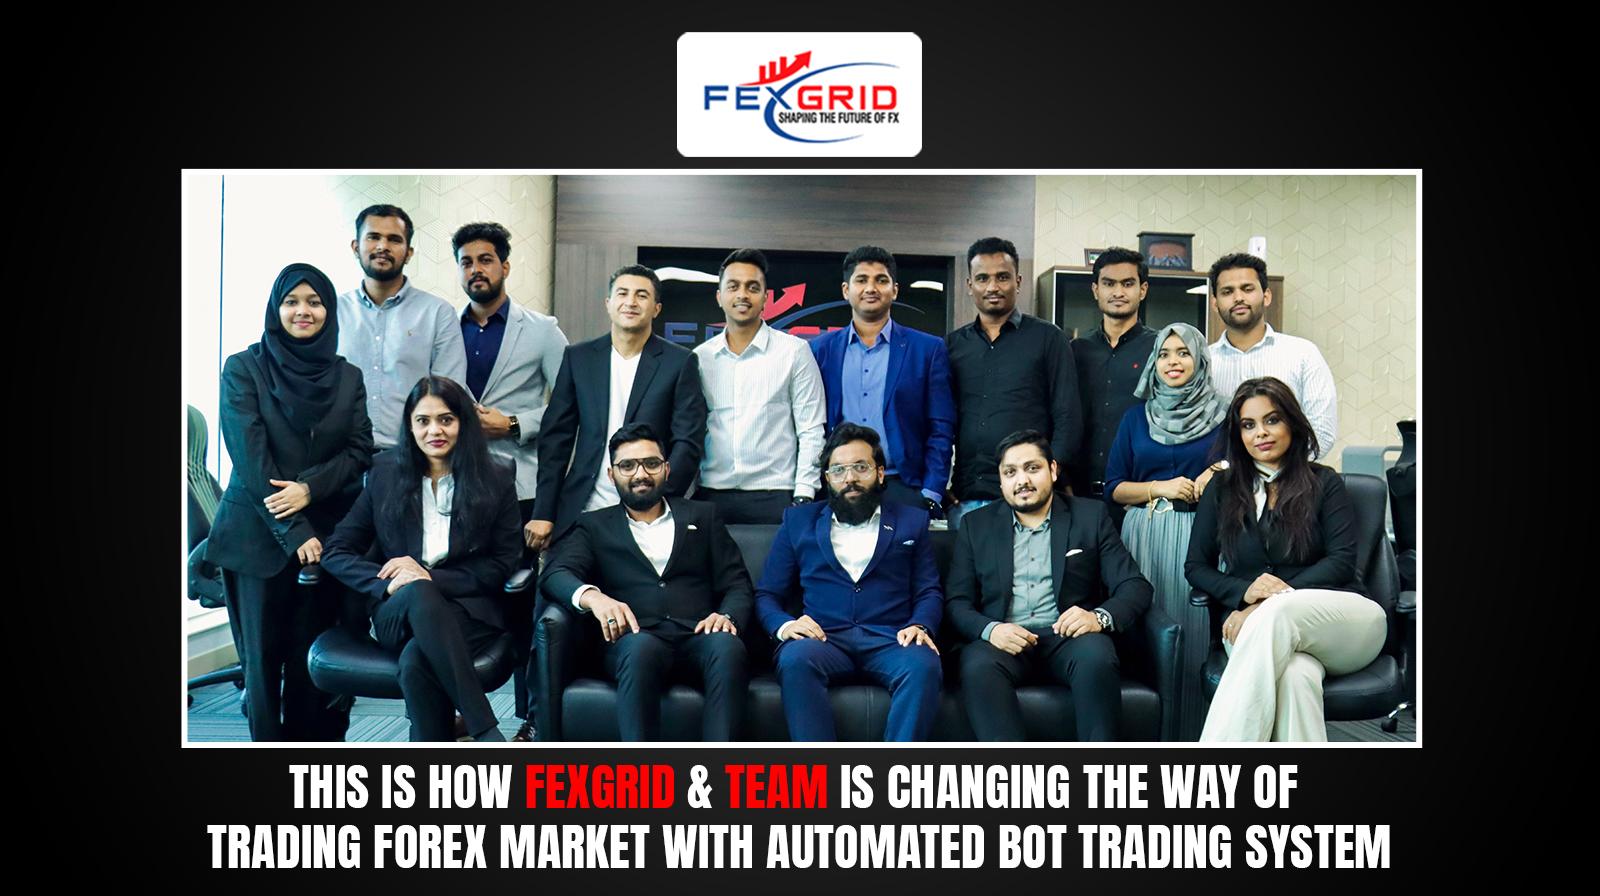 This Is How Fexgrid & Team Is Changing The Way Of Trading Forex Market With Automated Bot Trading System